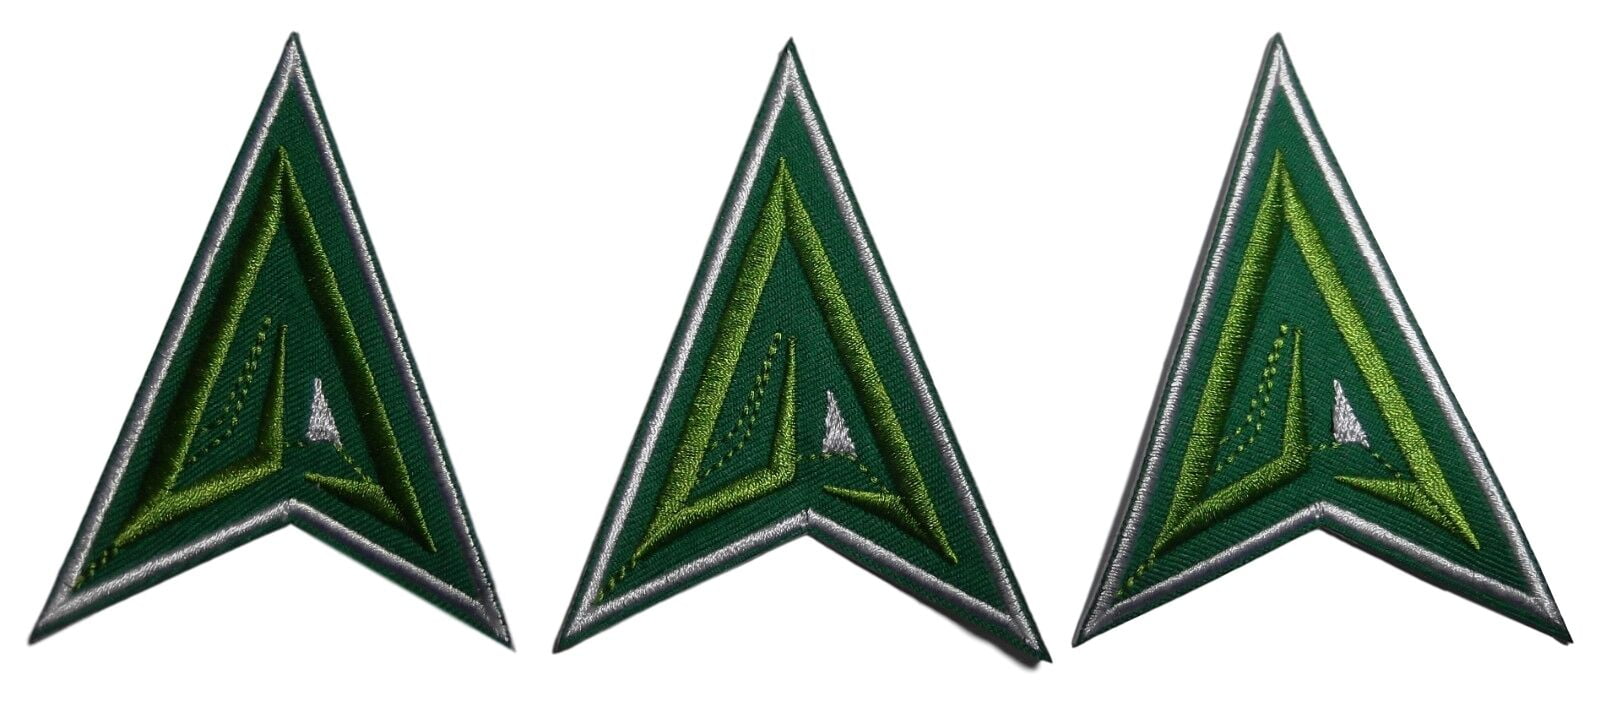 Dc Comics Green Arrow Shield Logo 3 Wide Set Of 3 Embroidered Iron On